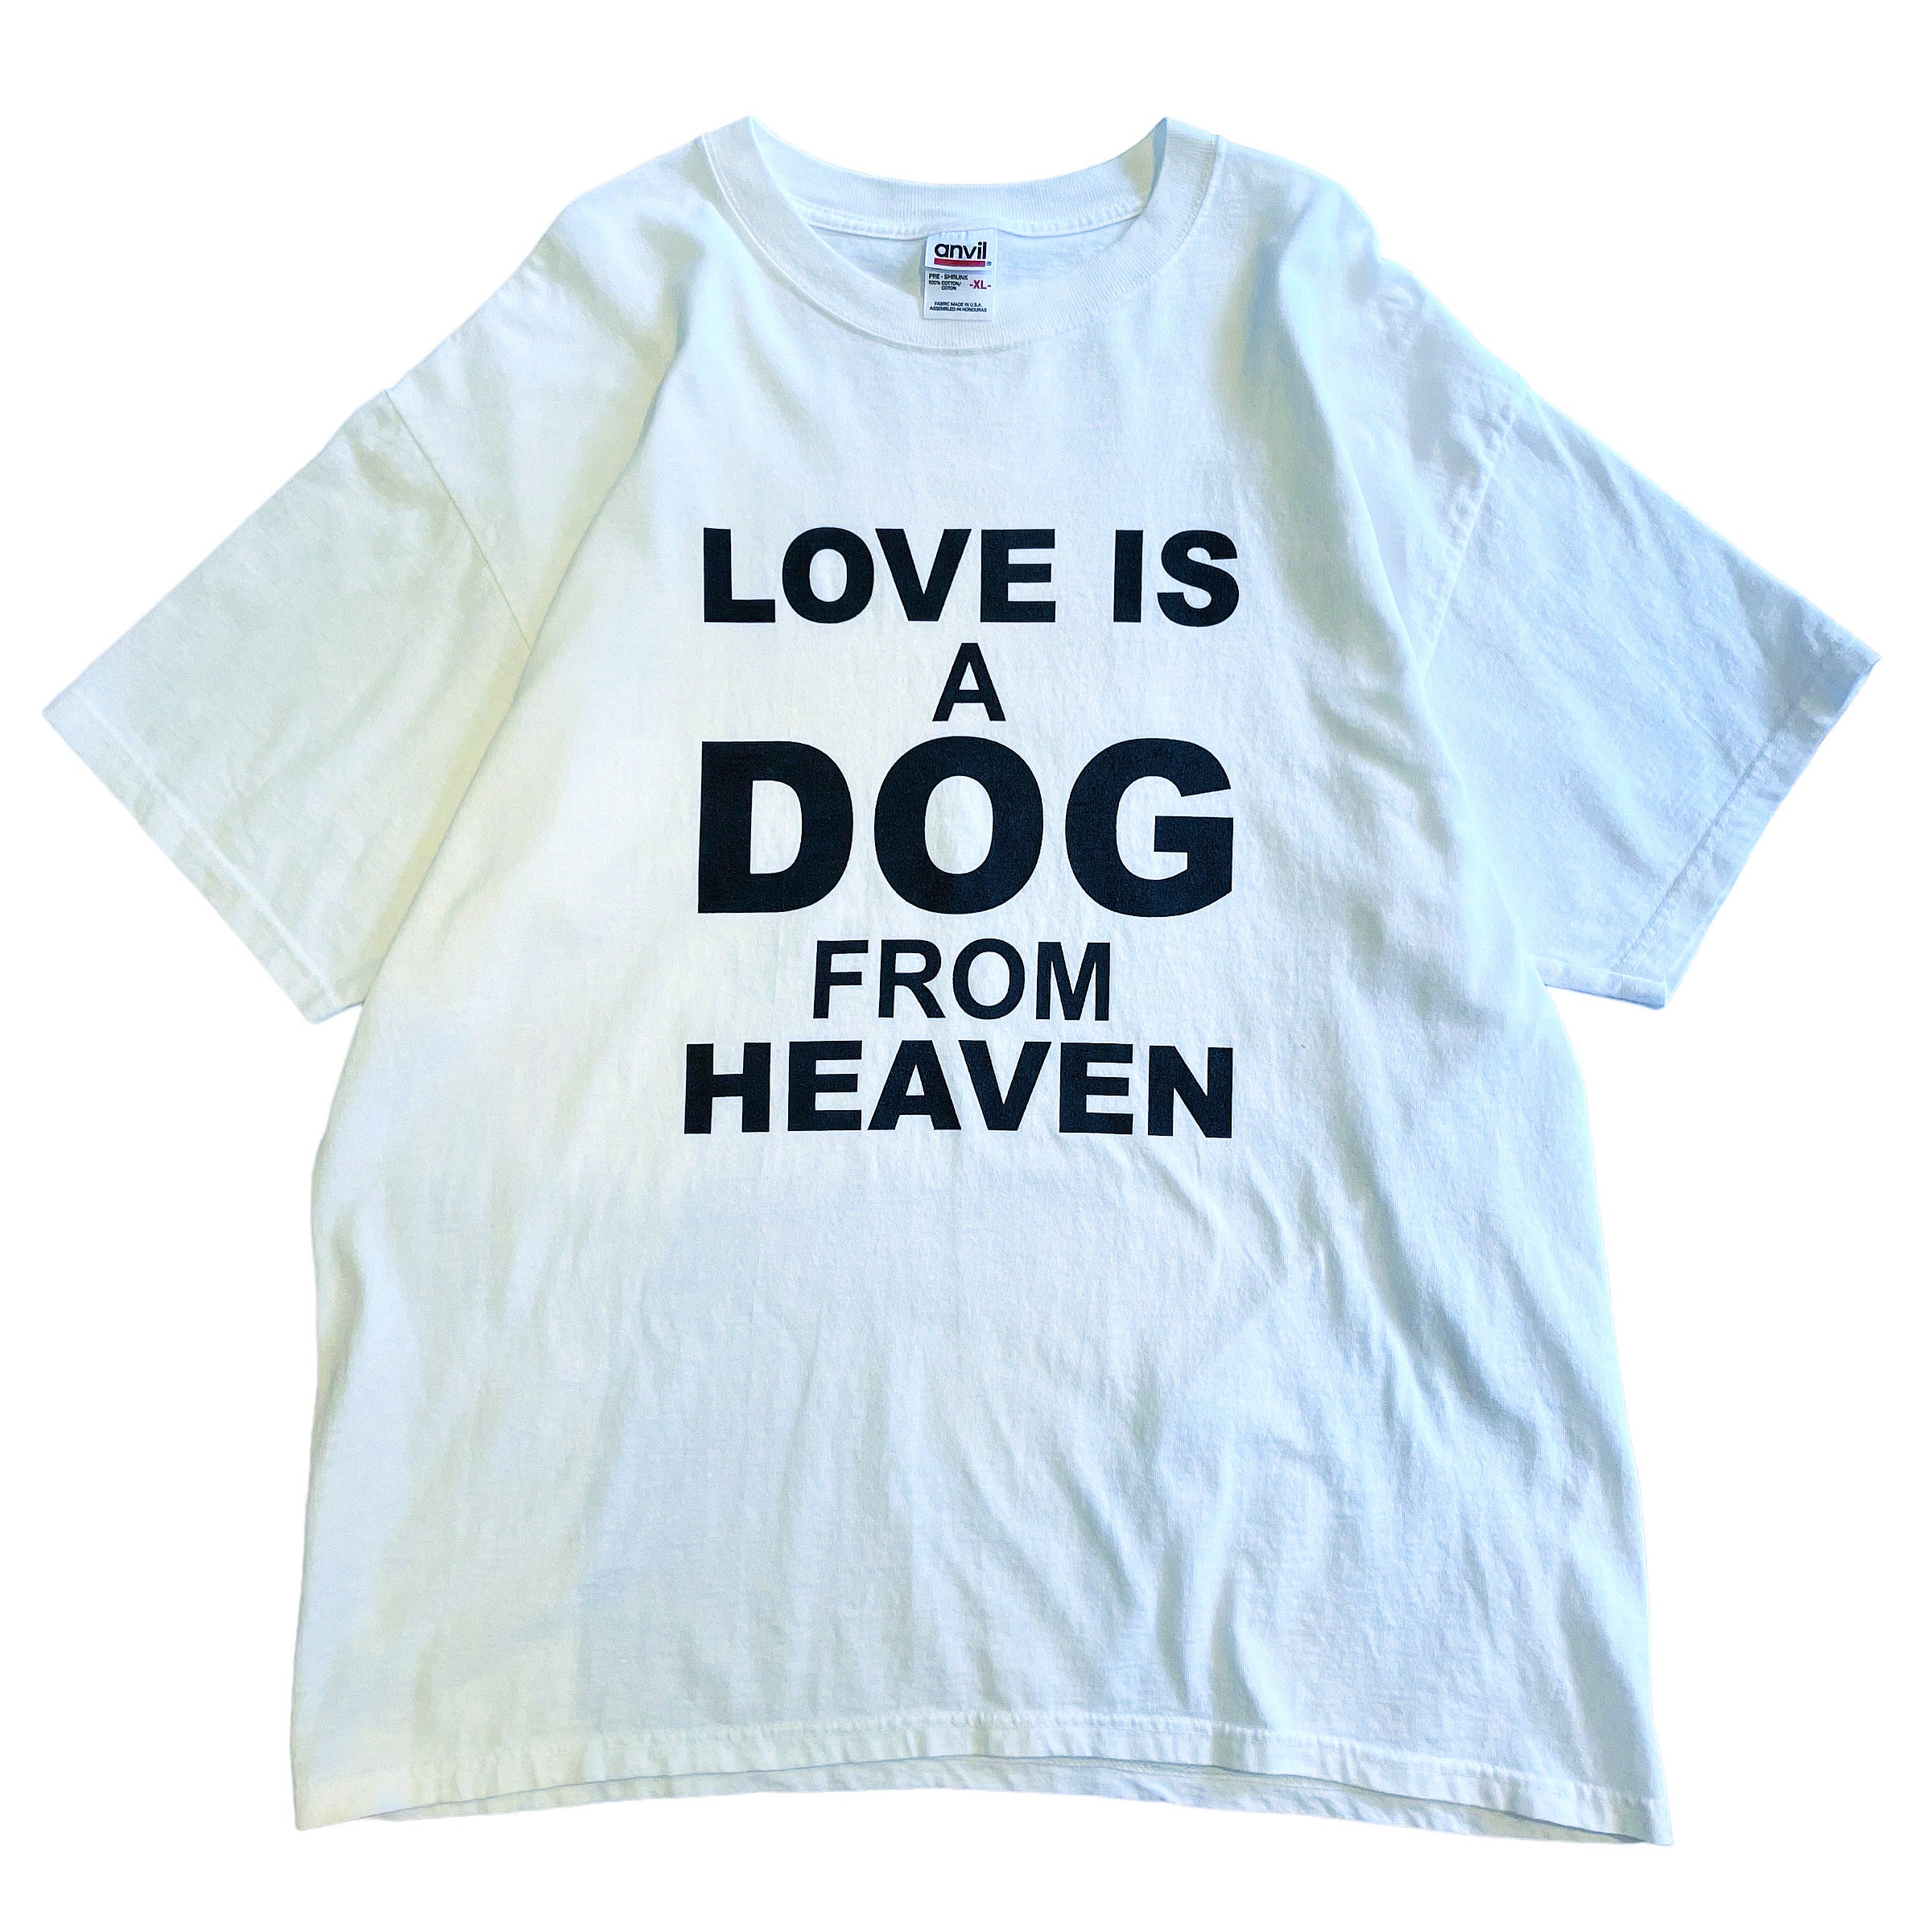 90s〜00s〜 anvil T-shirt LOVE A DOG FROM HEVEN XL アンビル tシャツ ...